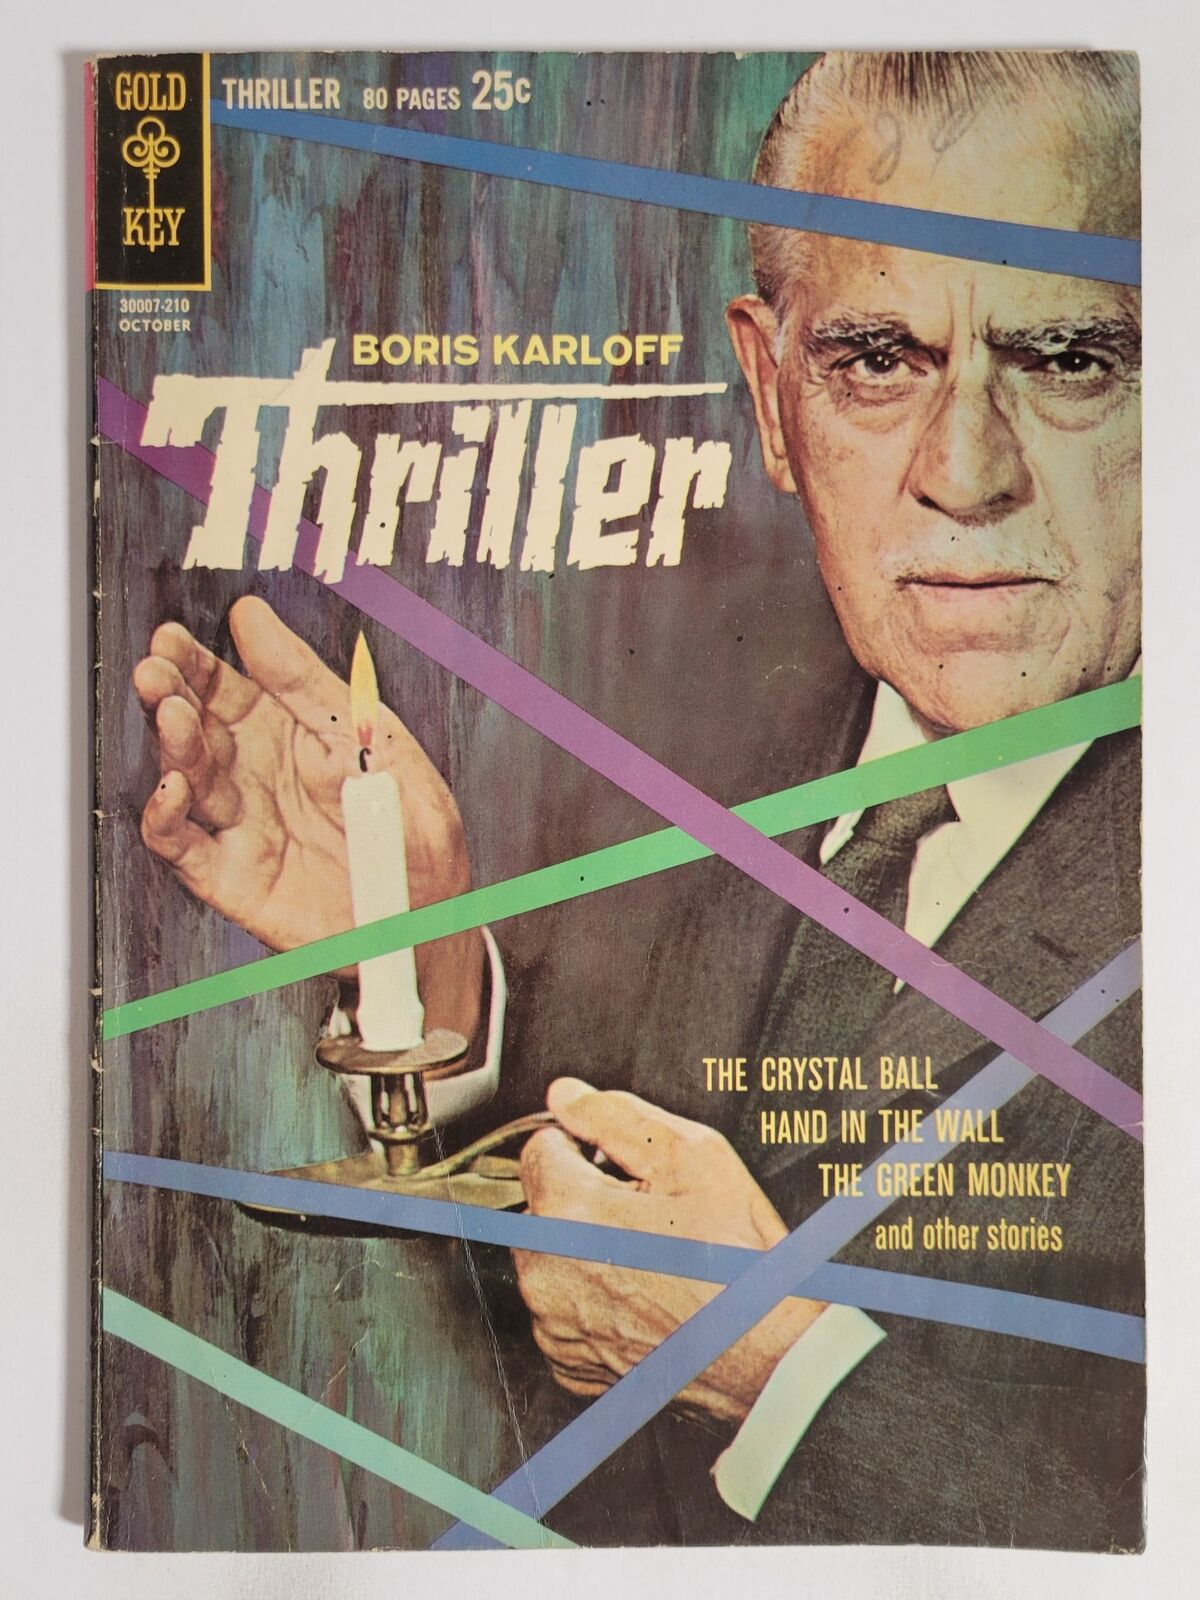 BORIS KARLOFF THRILLER #1 (VG-) 1962 FIRST ISSUE! "THE CRYSTAL BALL!" SILVER AGE